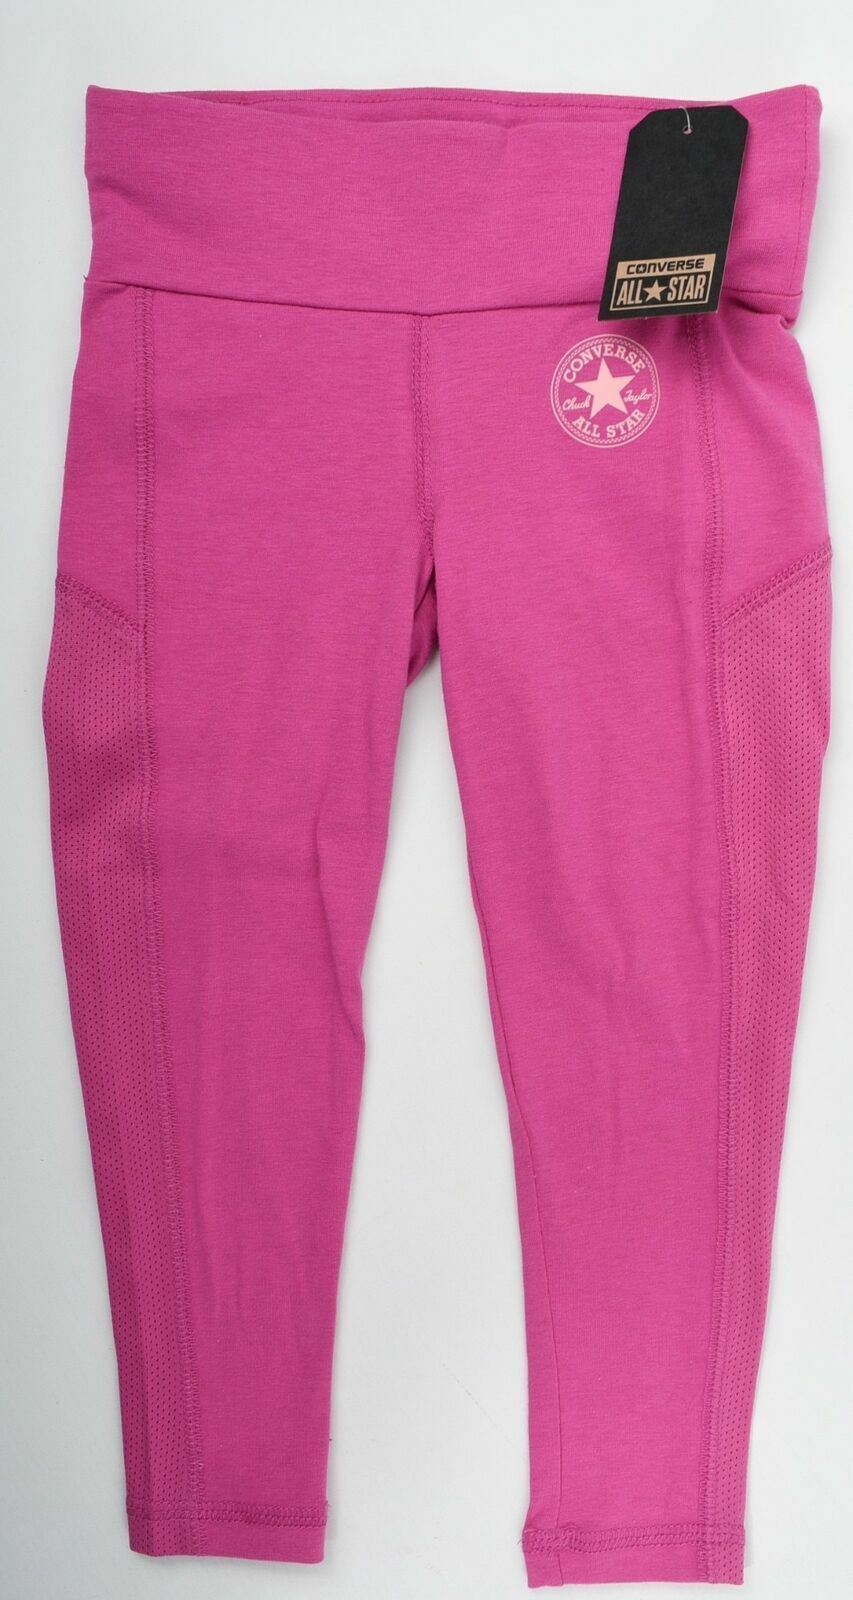 CONVERSE ALL-STAR Girl's Pink Leggings- 3 years to 4 Years 96-104cm